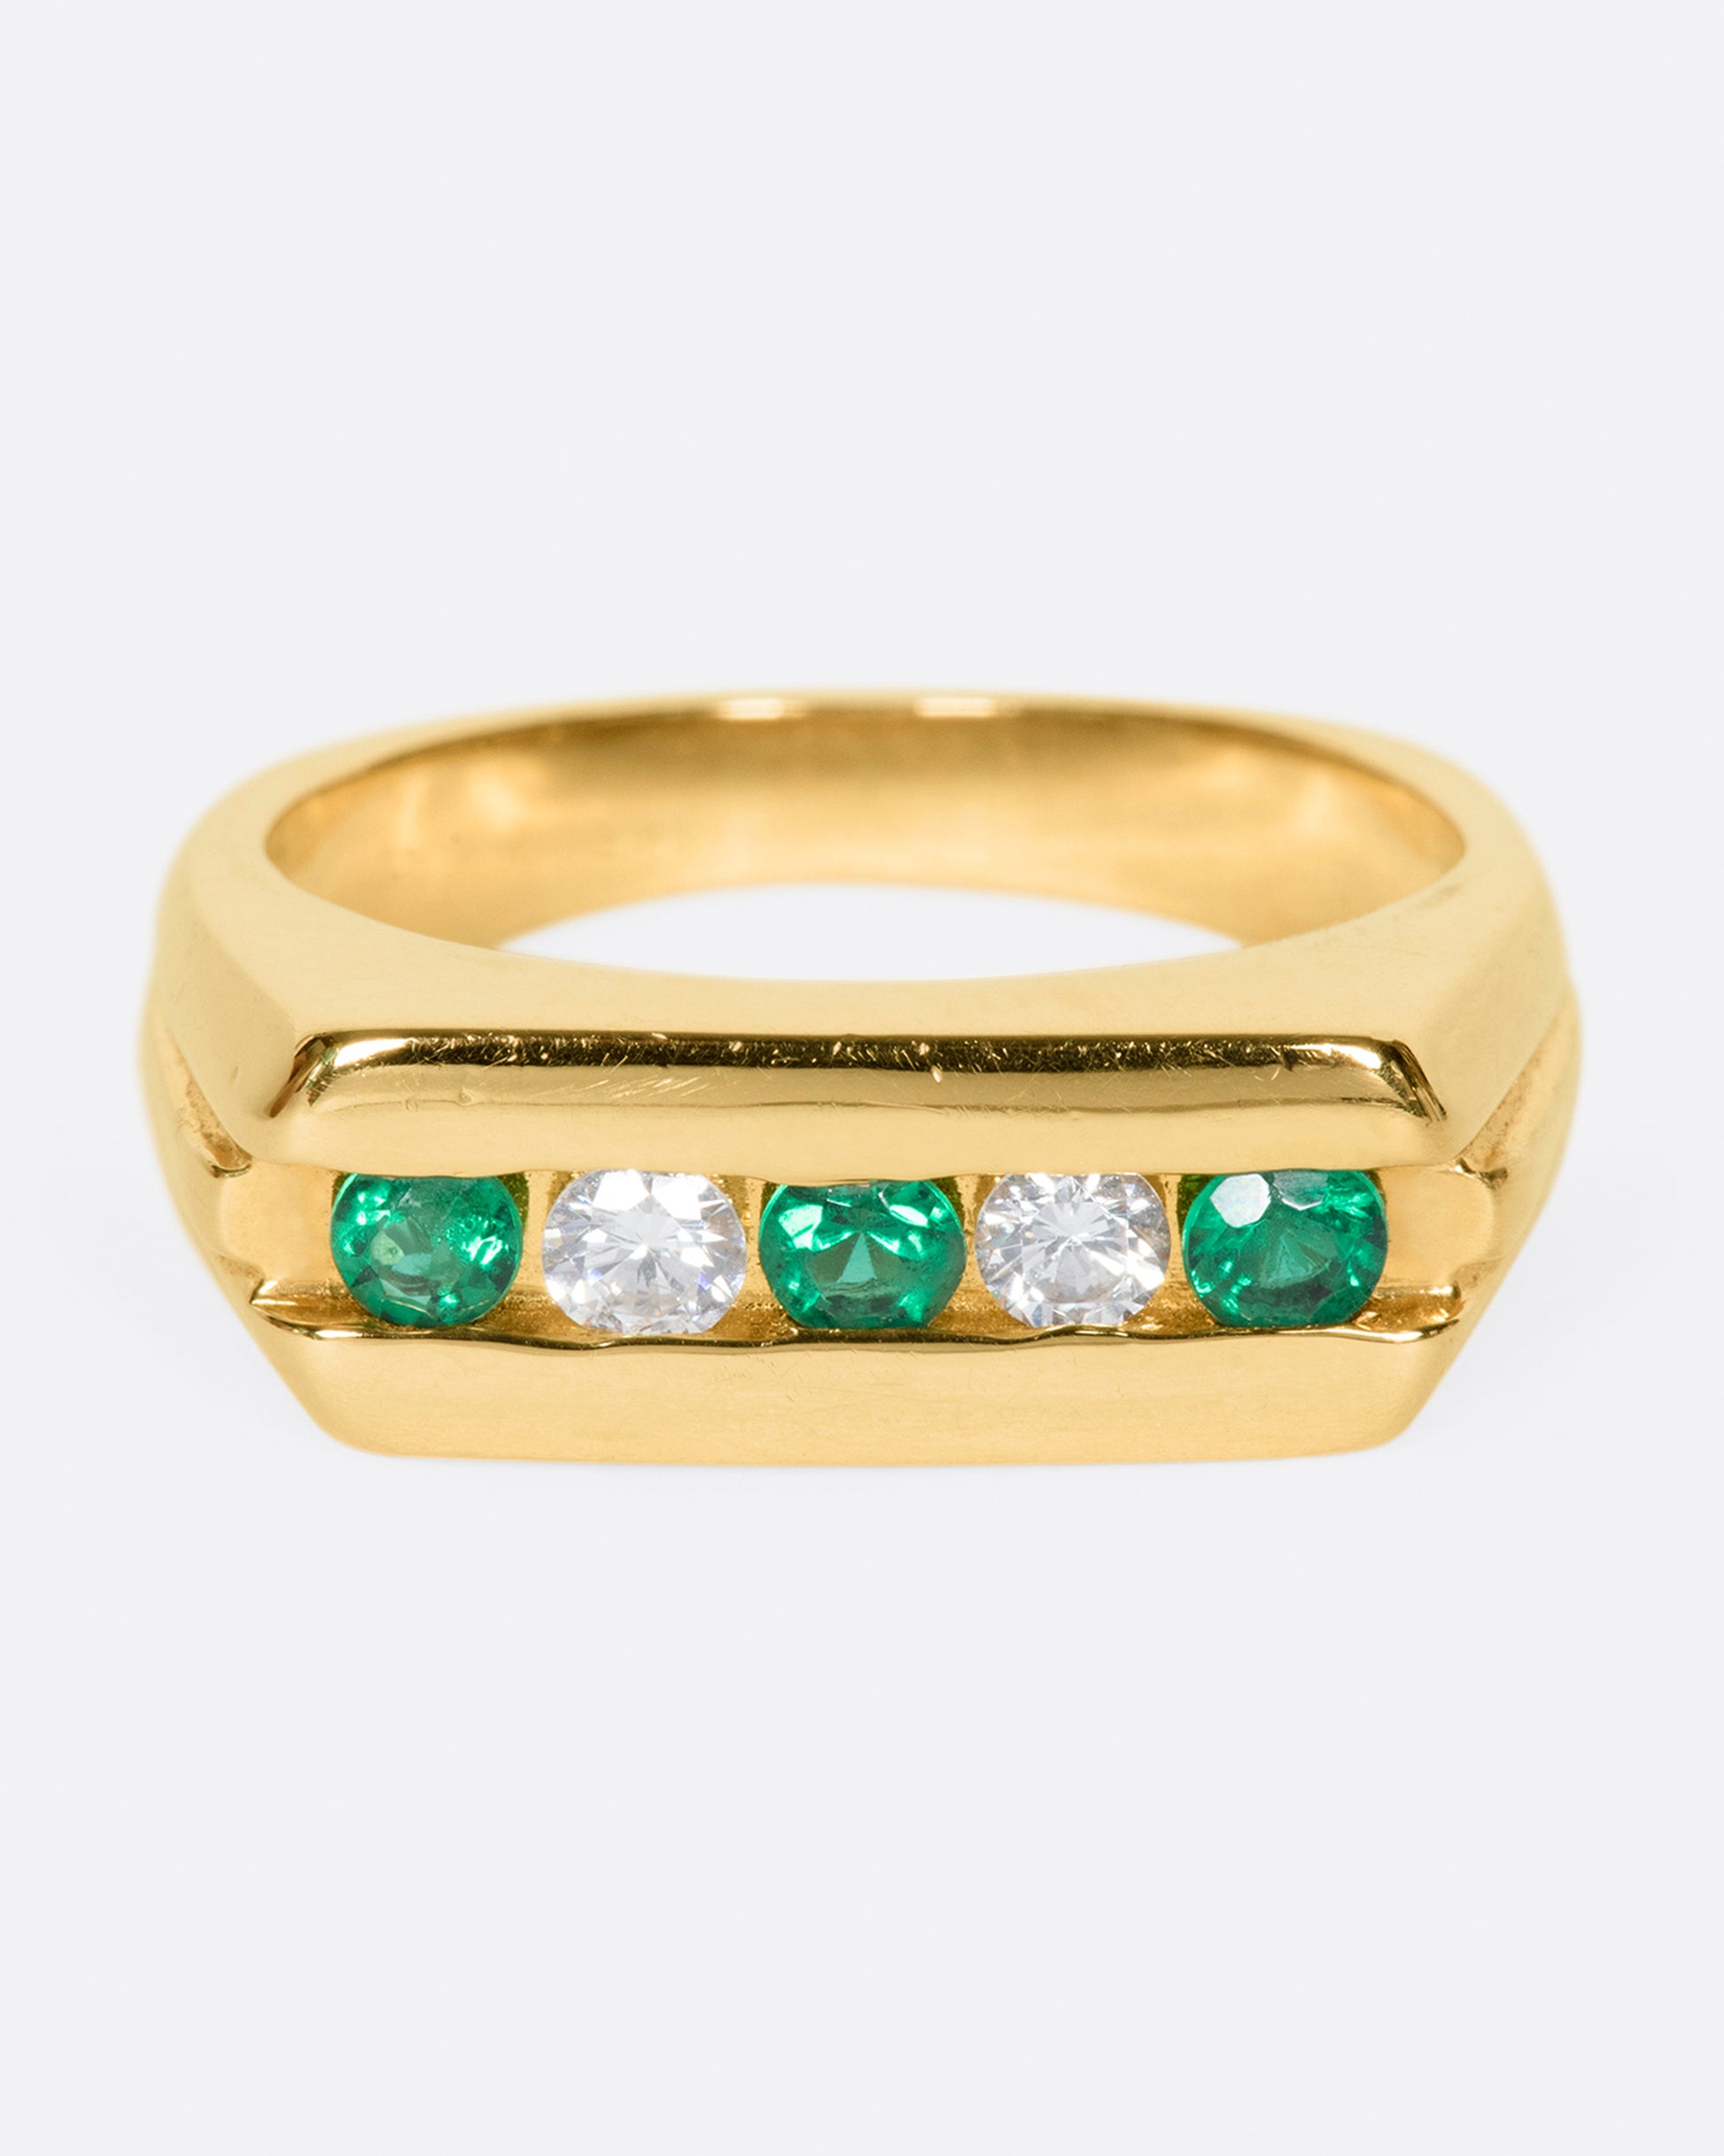 The face of this ring features five channel set stones; three emeralds and two diamonds.